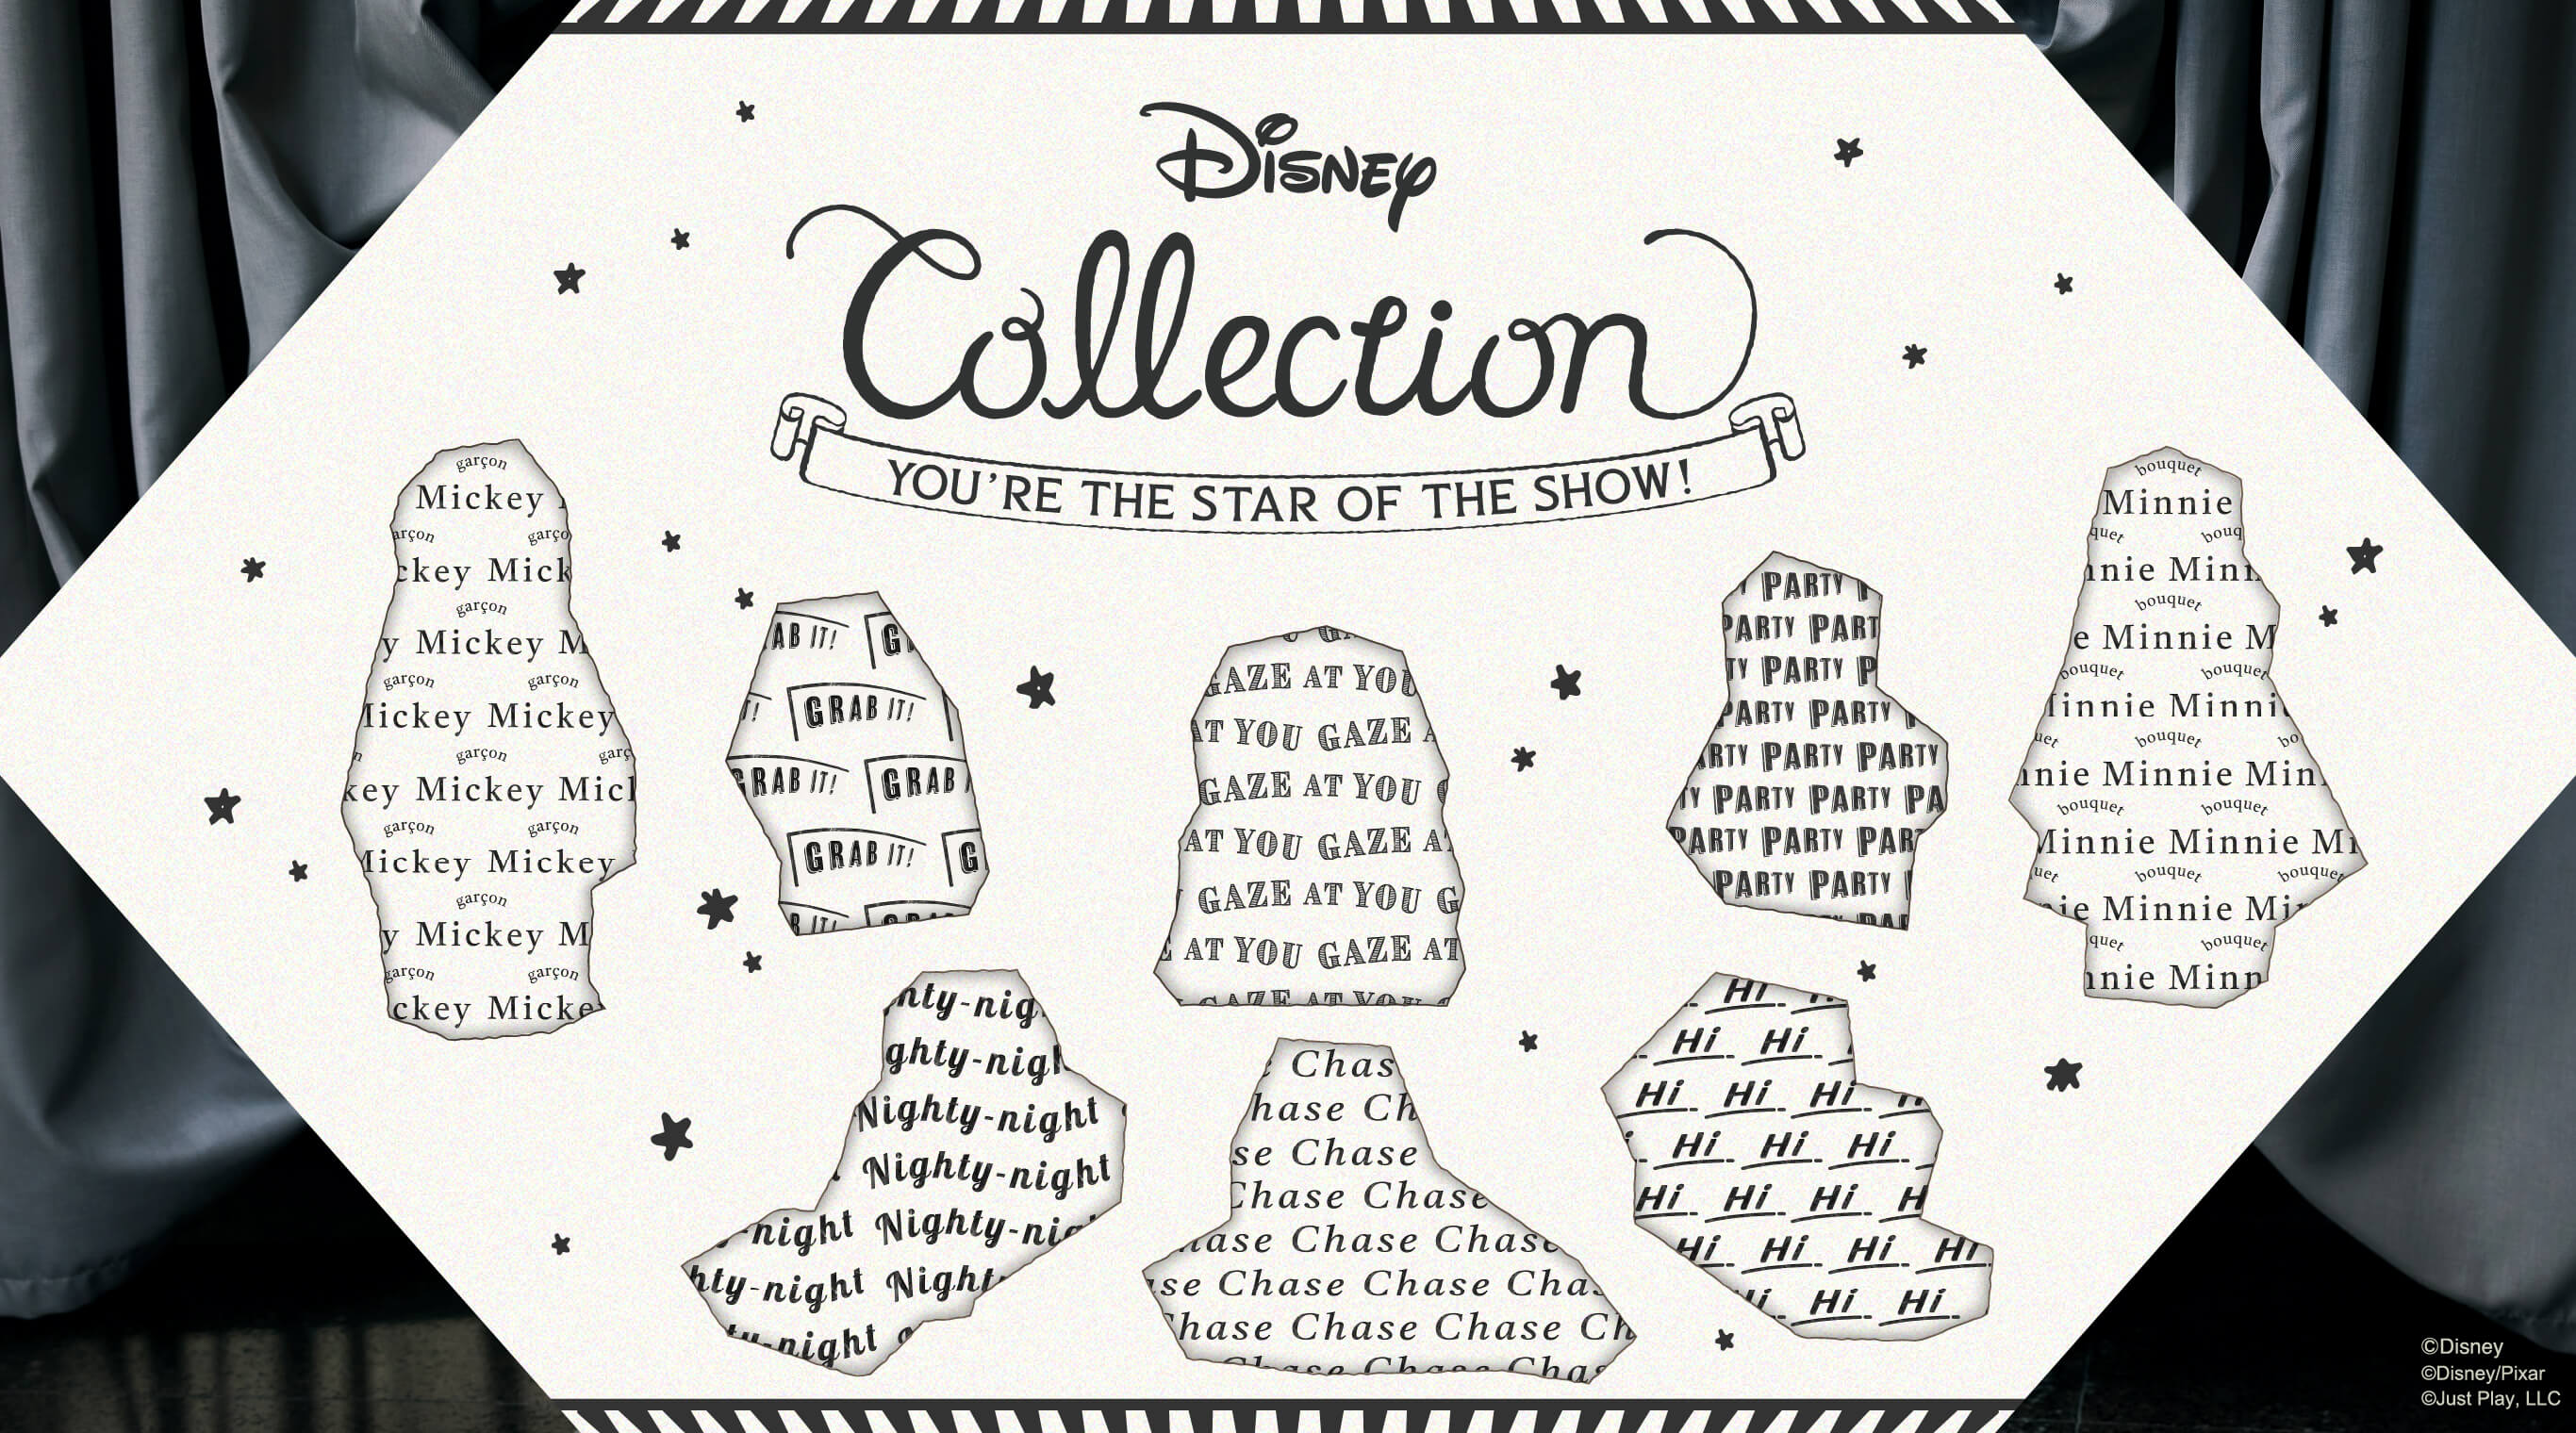 Disney Collection You're the start of the show!